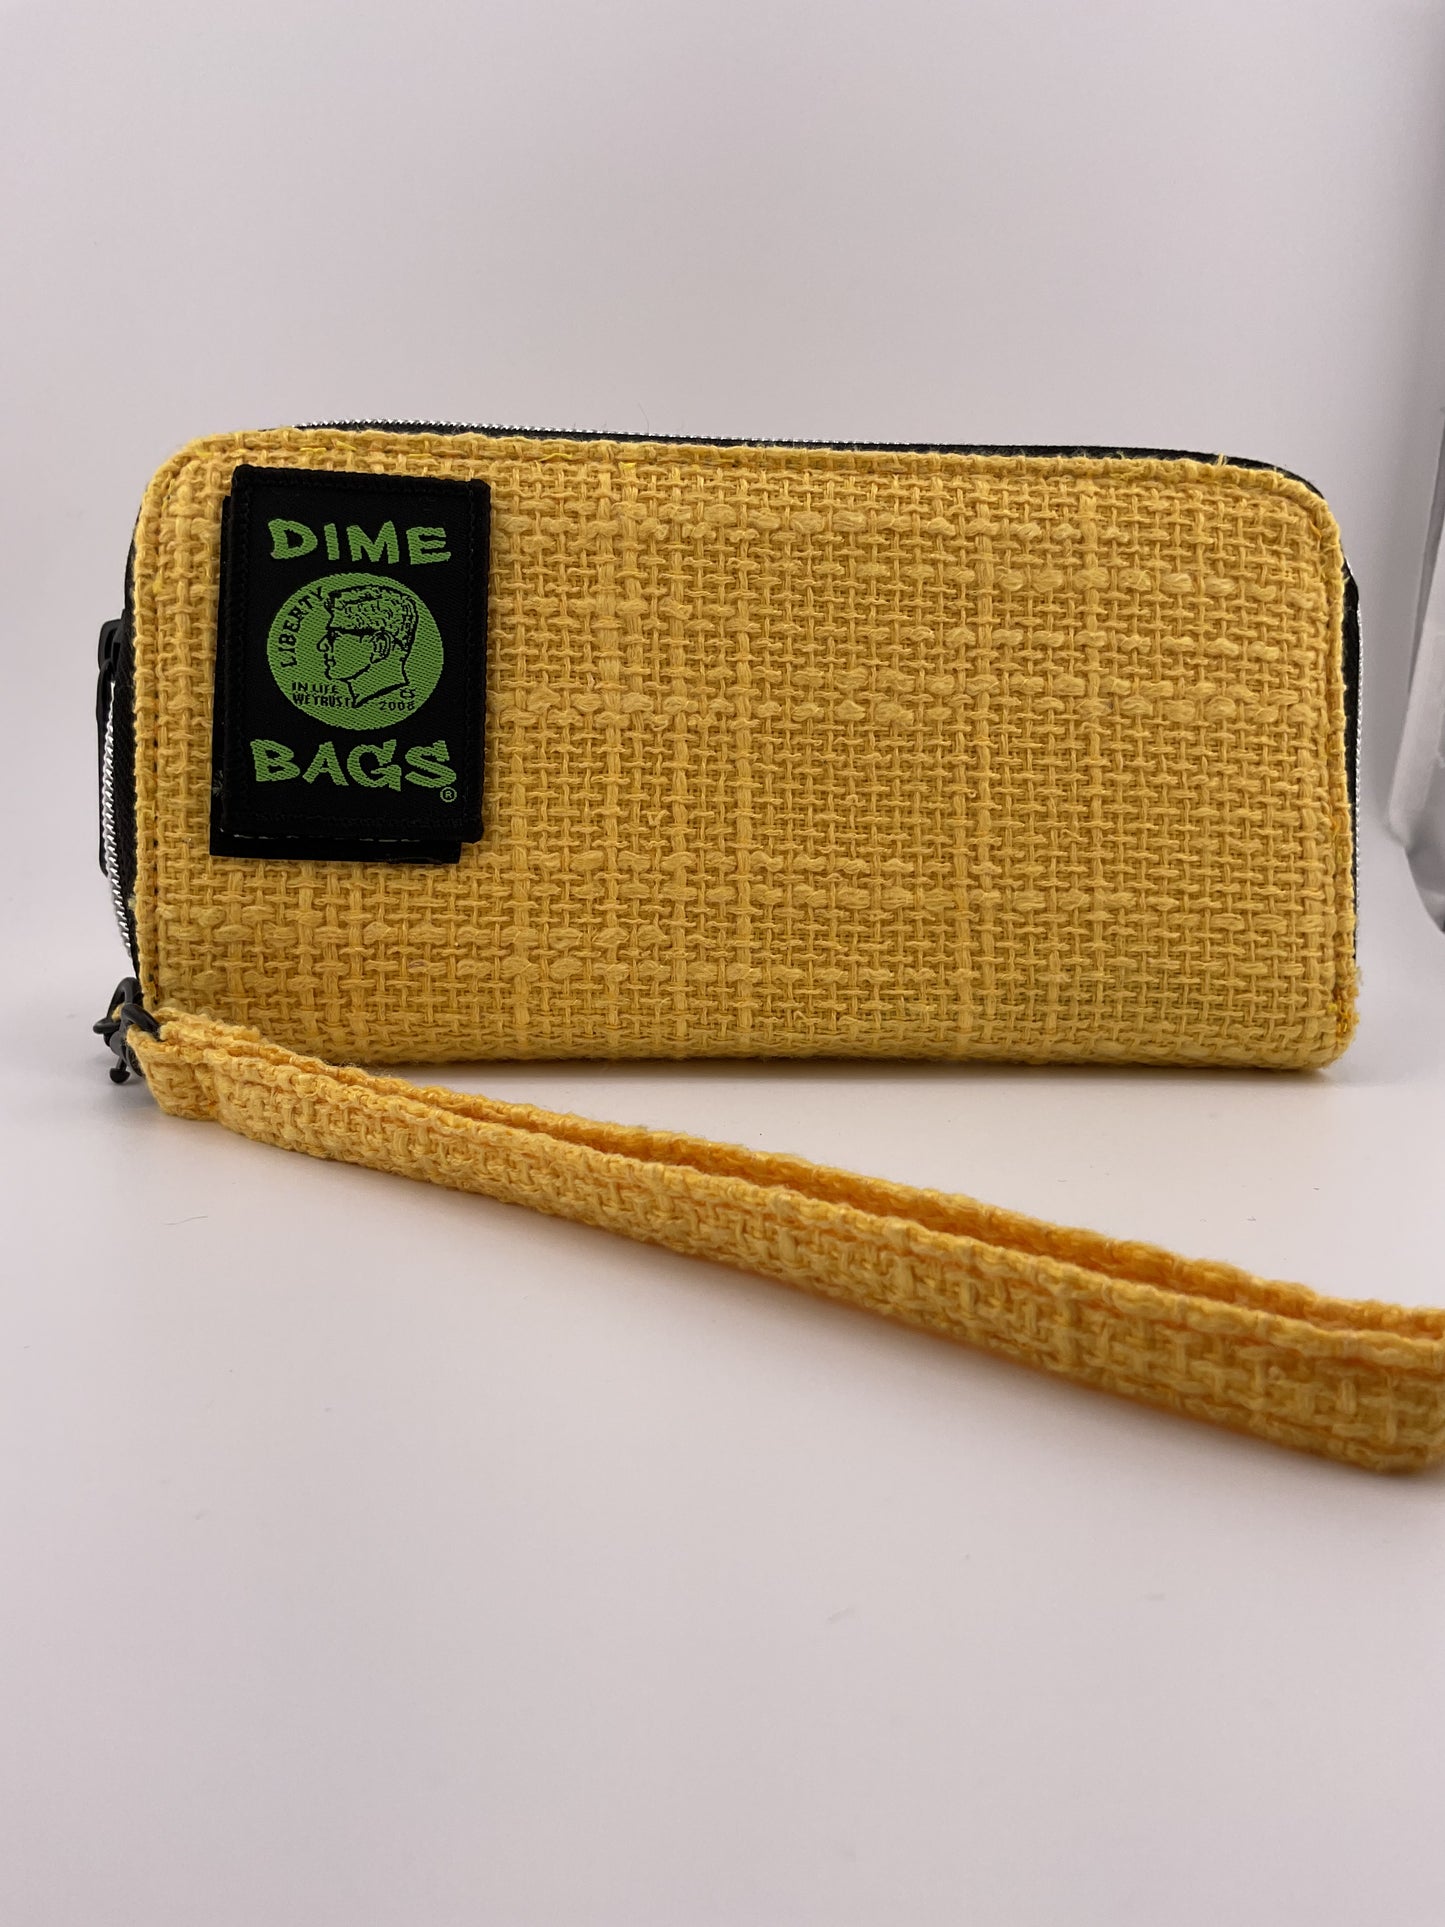 DIME BAGS Wristlet Wallet - RFID-Blocking Carrying Case with Secure Zipper and Wristlet Loop